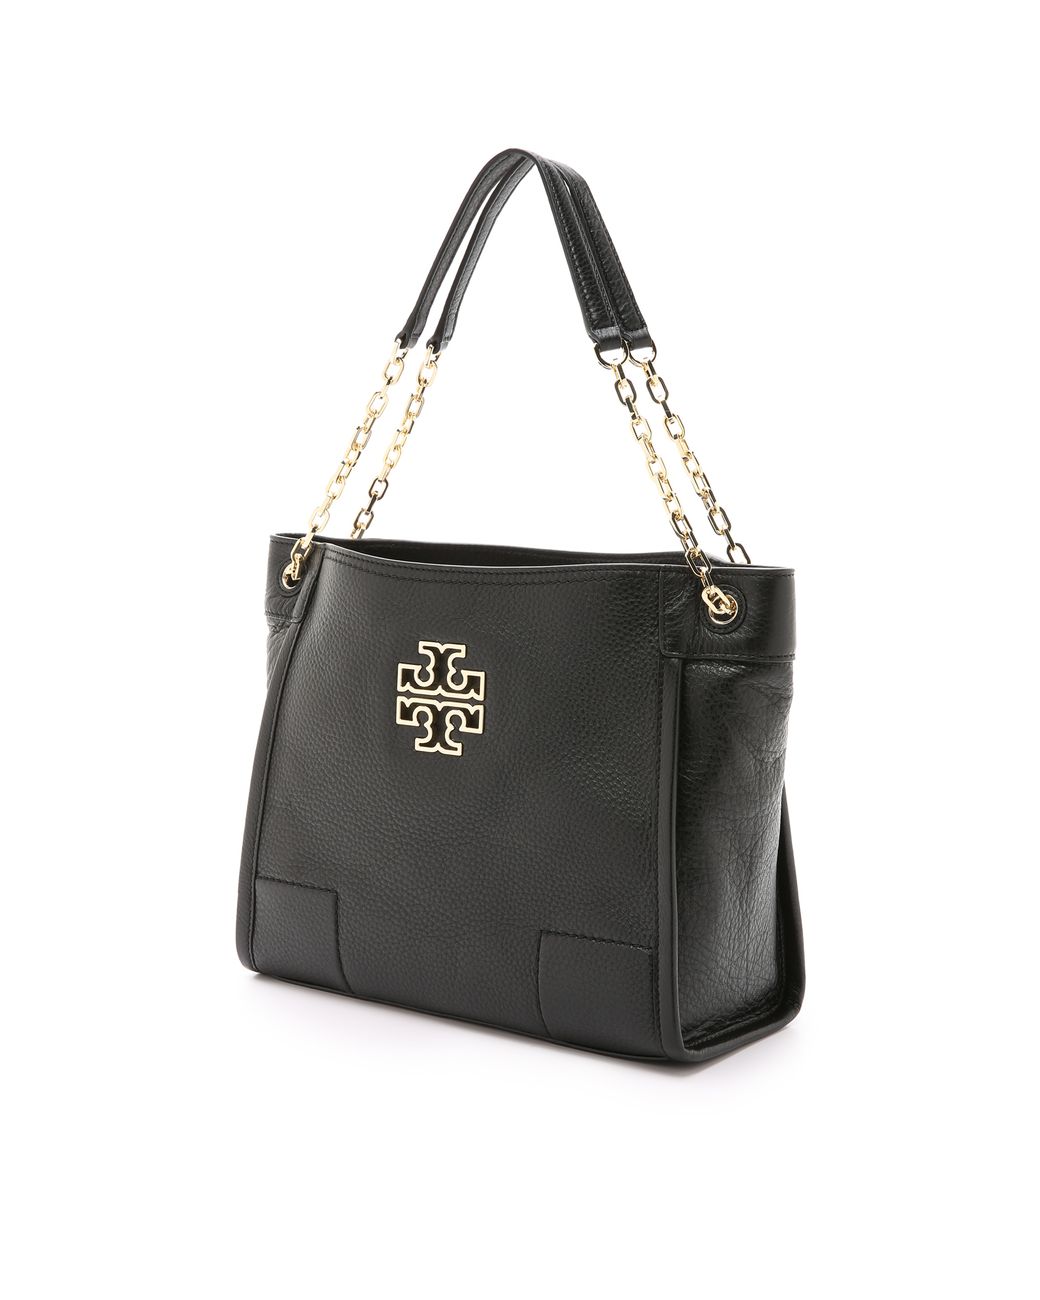 Tory Burch Britten Small Slouchy Tote - Black | Lyst